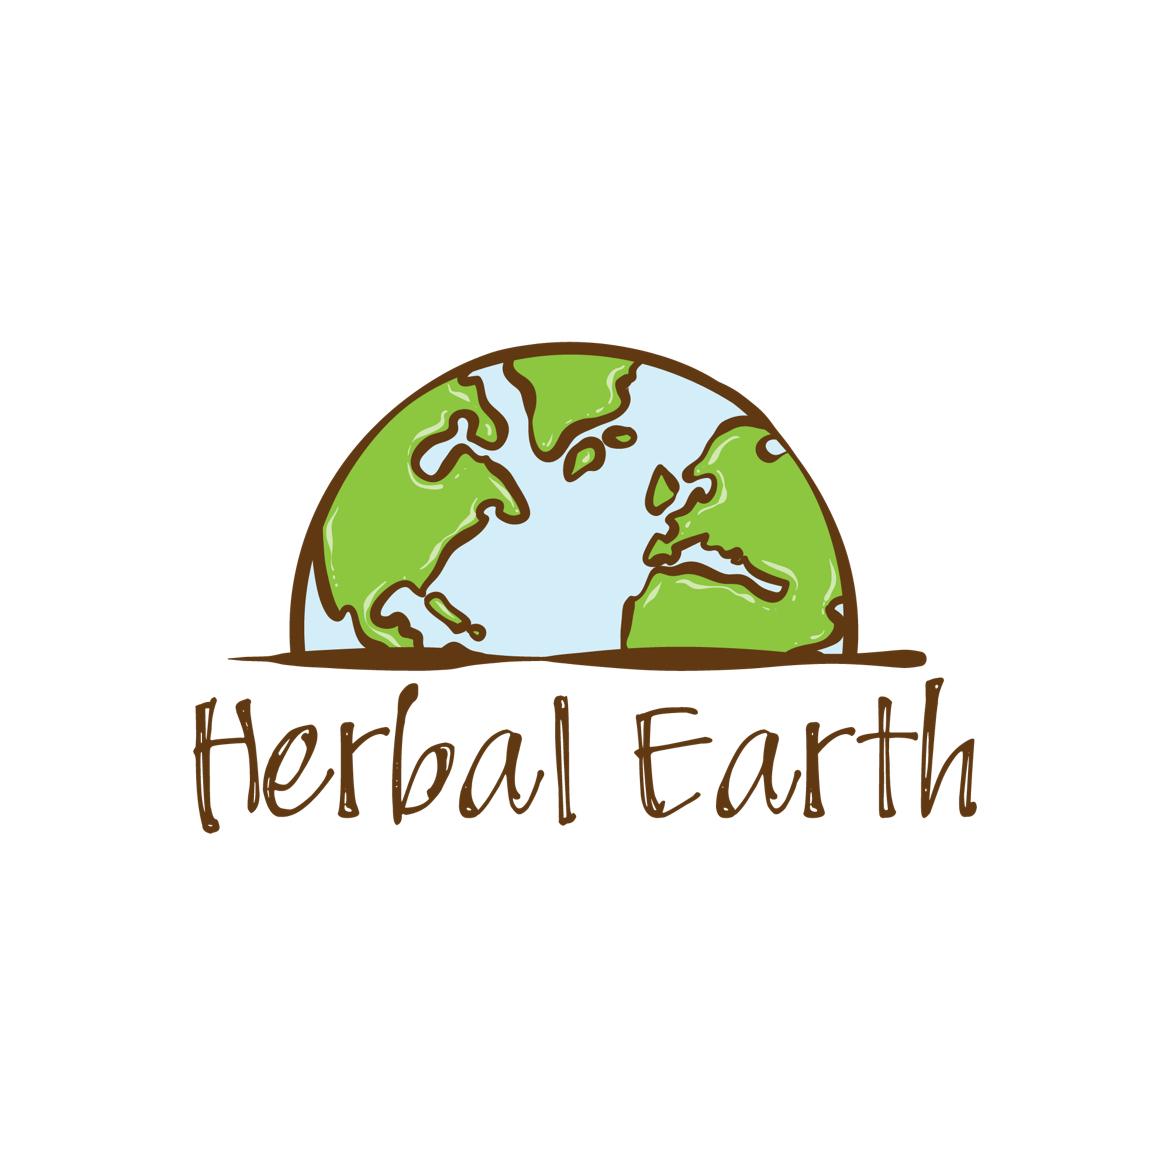 Herbal Earth Co's images